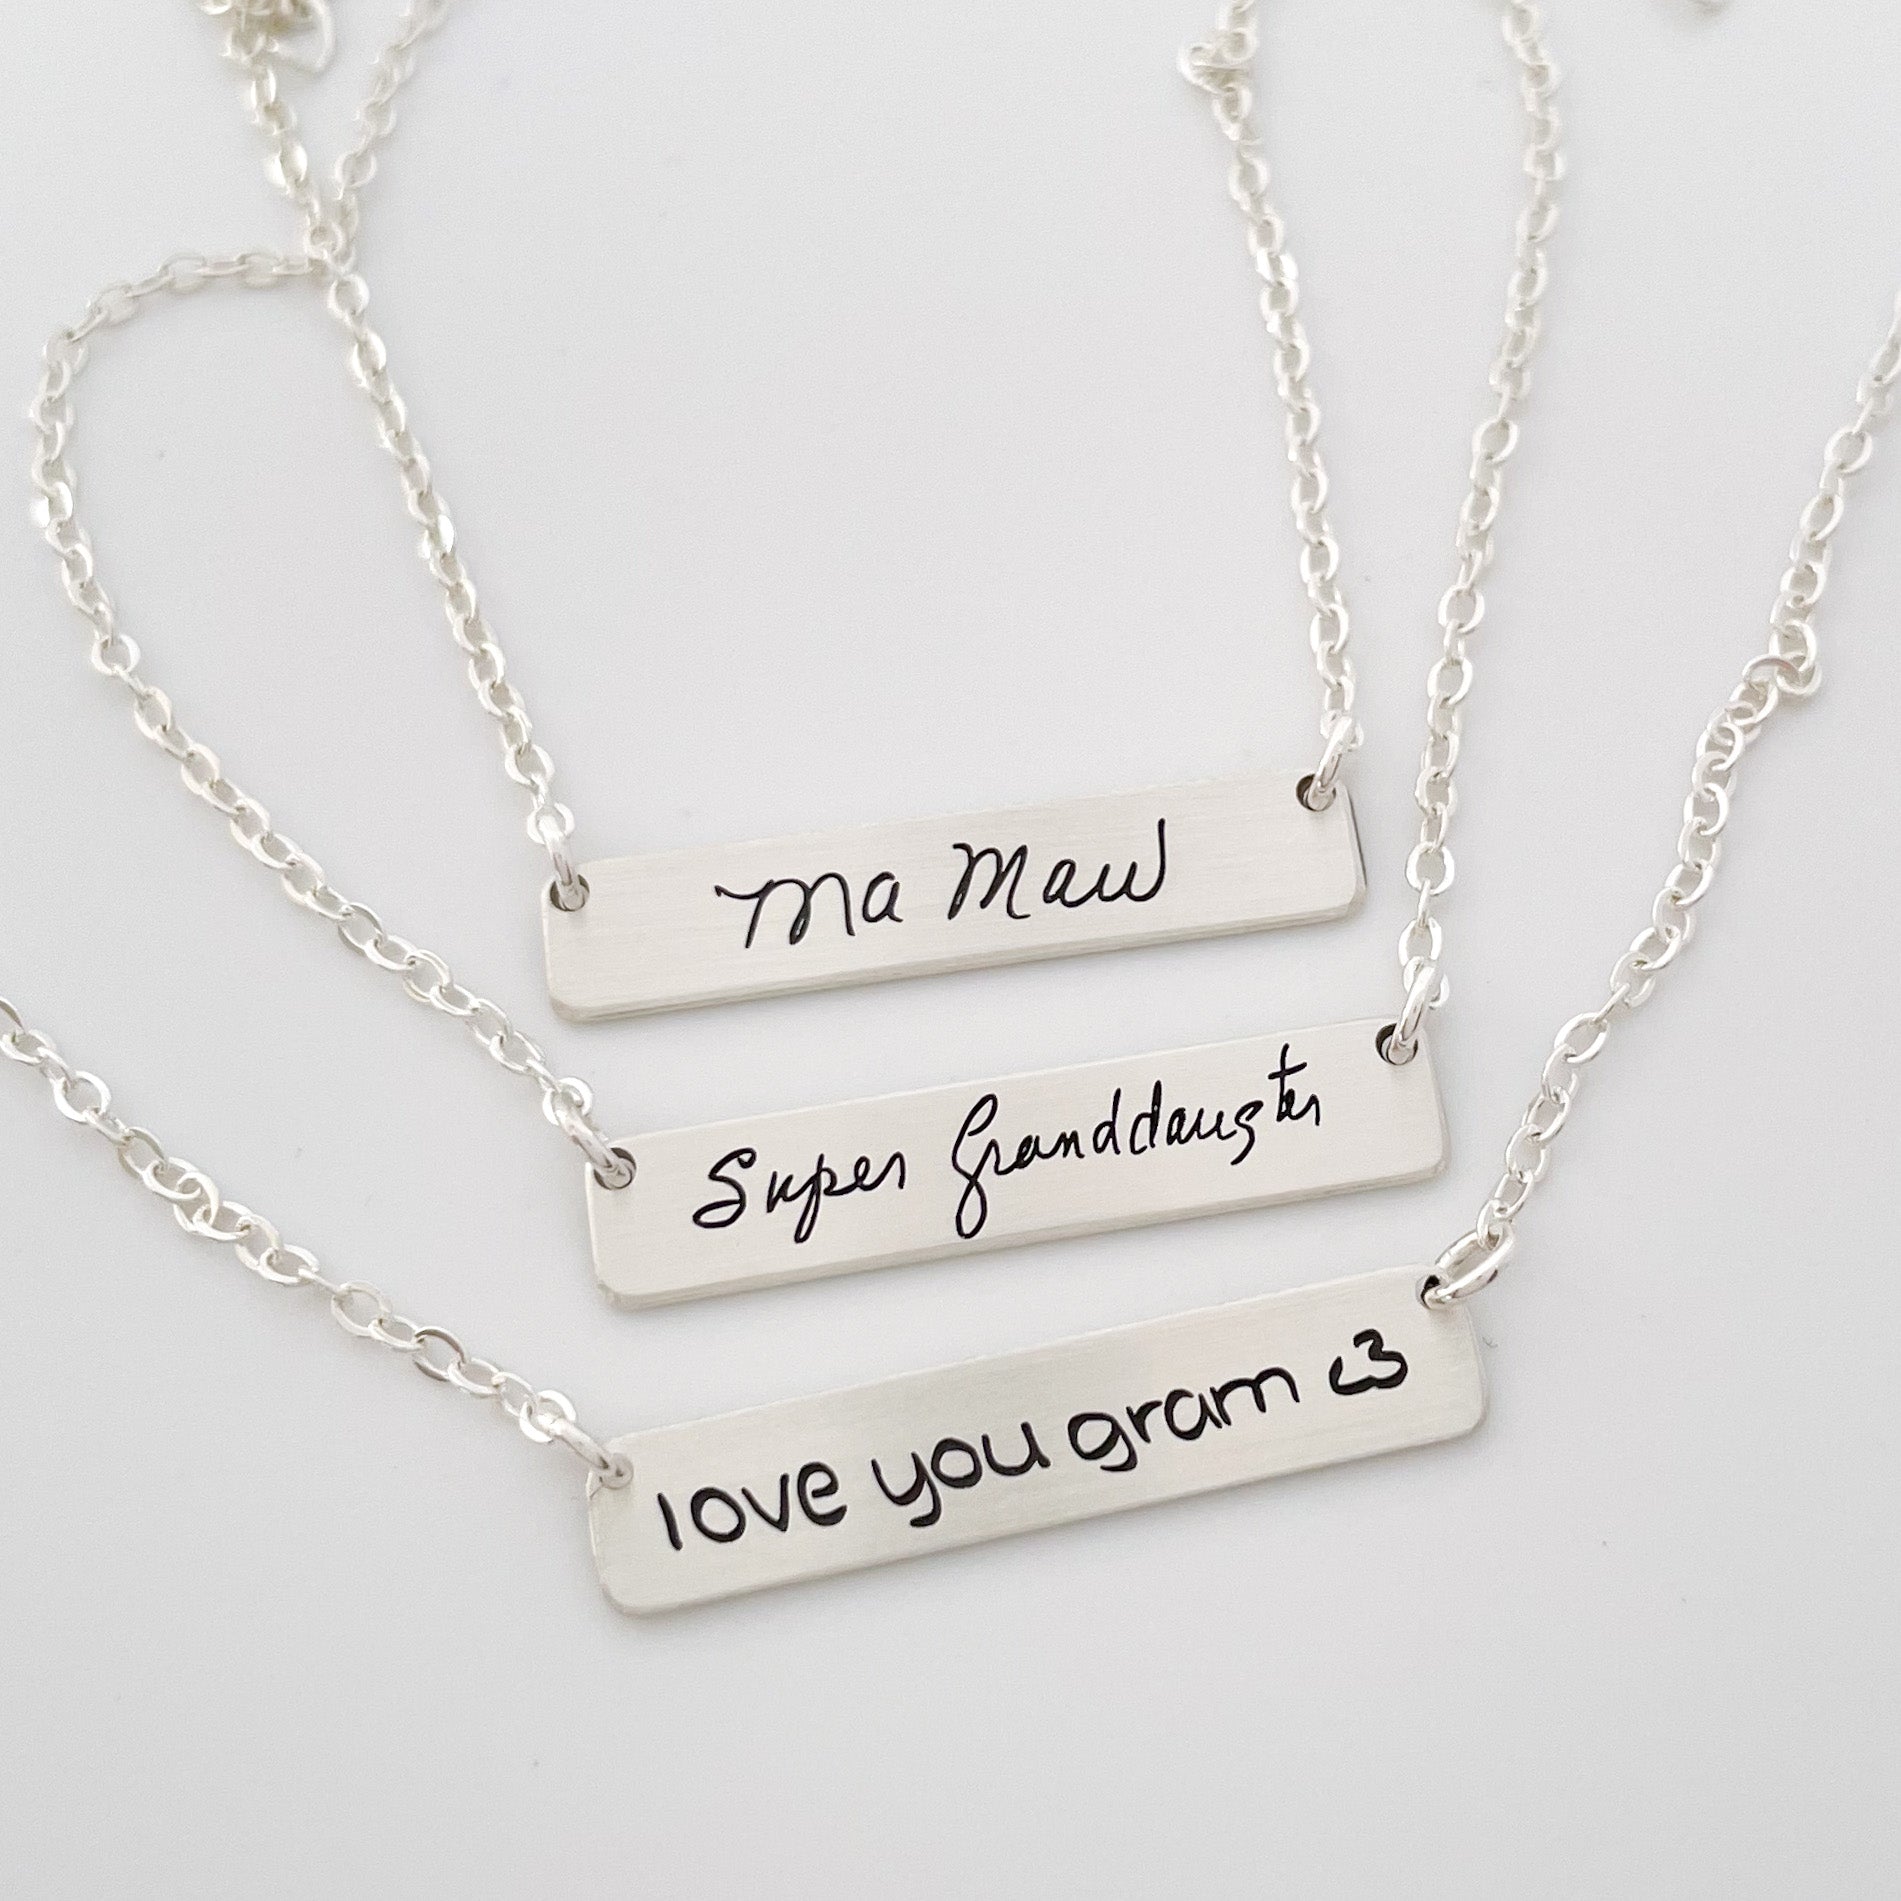 Mia Necklace | Minimal Bar Necklace | Memorial Jewelry Engraved With Your Writing, Fingerprints and Signatures | Scripted Jewelry